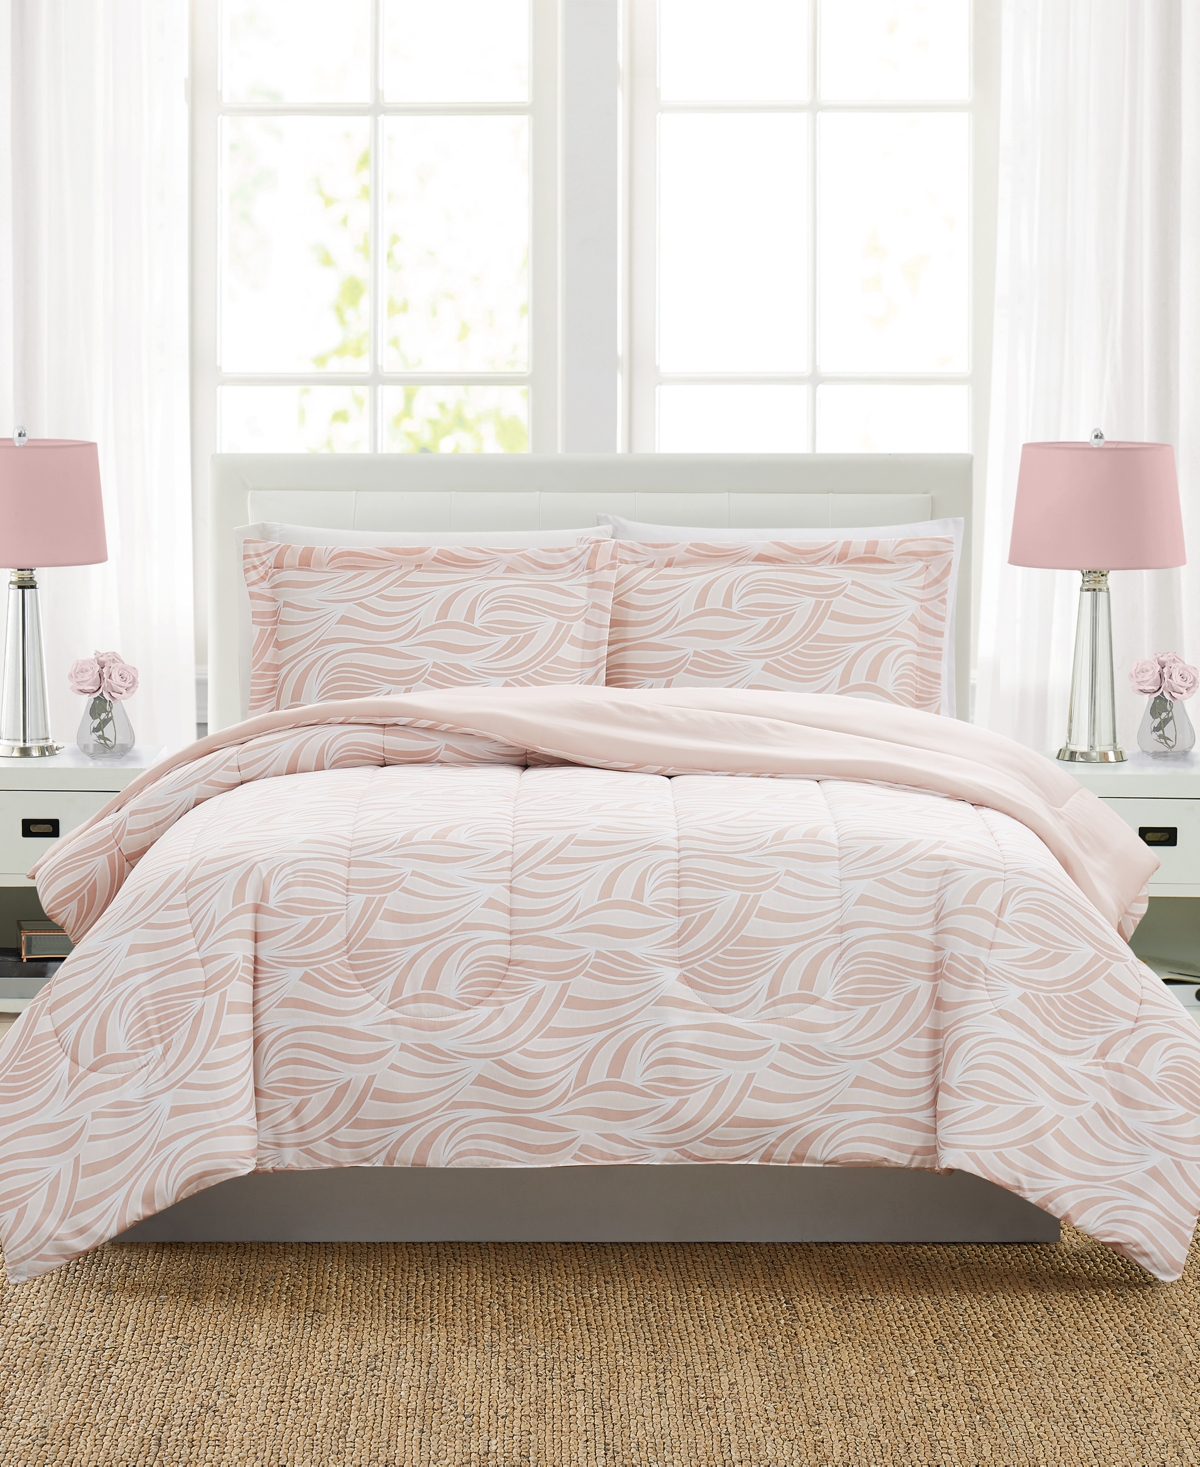 Pem America Samantha 3-pc. King Comforter Set, Created For Macy's Bedding In Pastel Pink